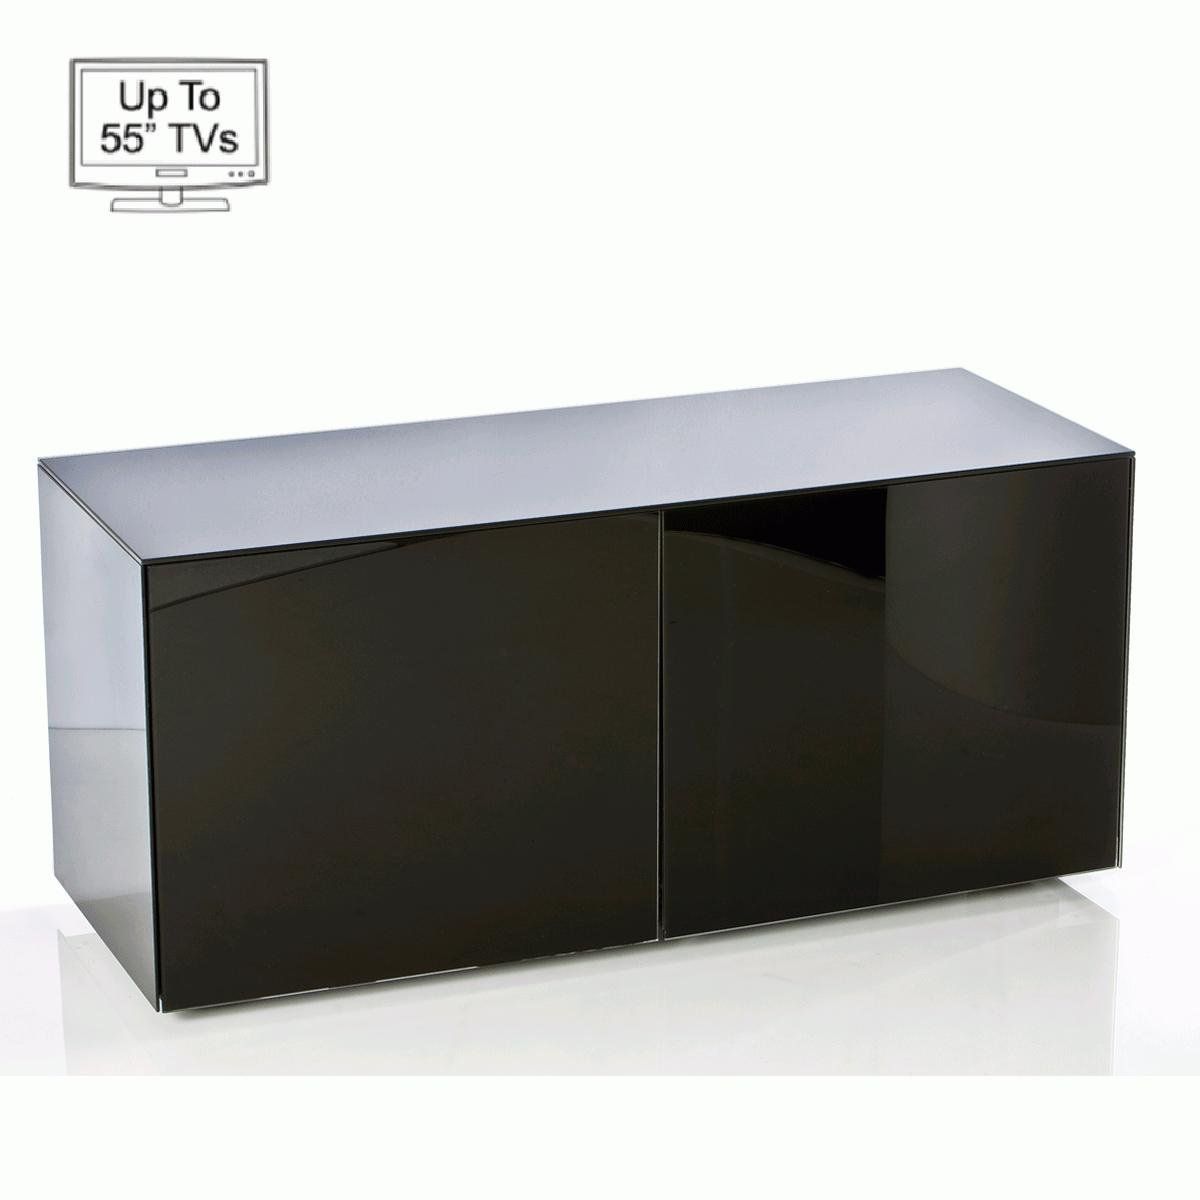 Invictus Black High Gloss Tv Stand For Up To 55" Tvs For Tv Cabinets Black High Gloss (Photo 6 of 15)